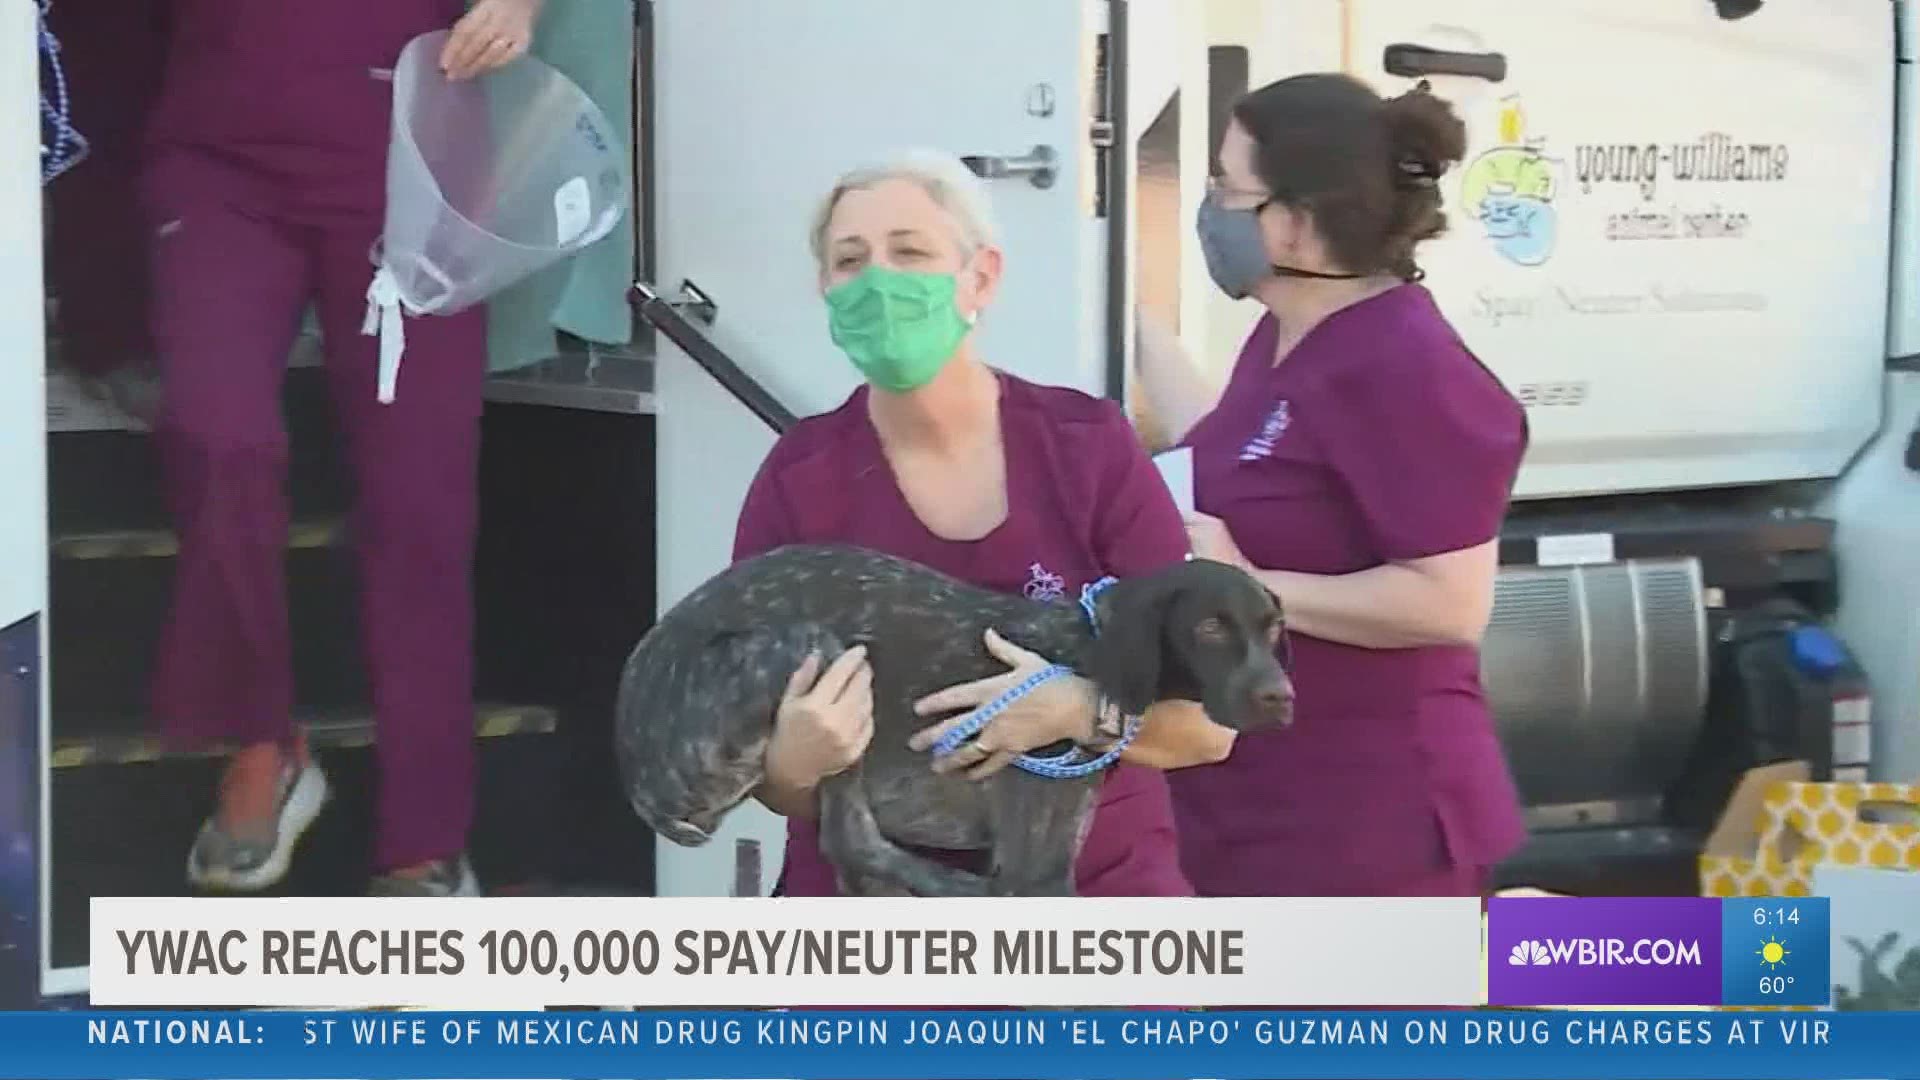 Young-Williams Animal Center celebrated a huge milestone today!